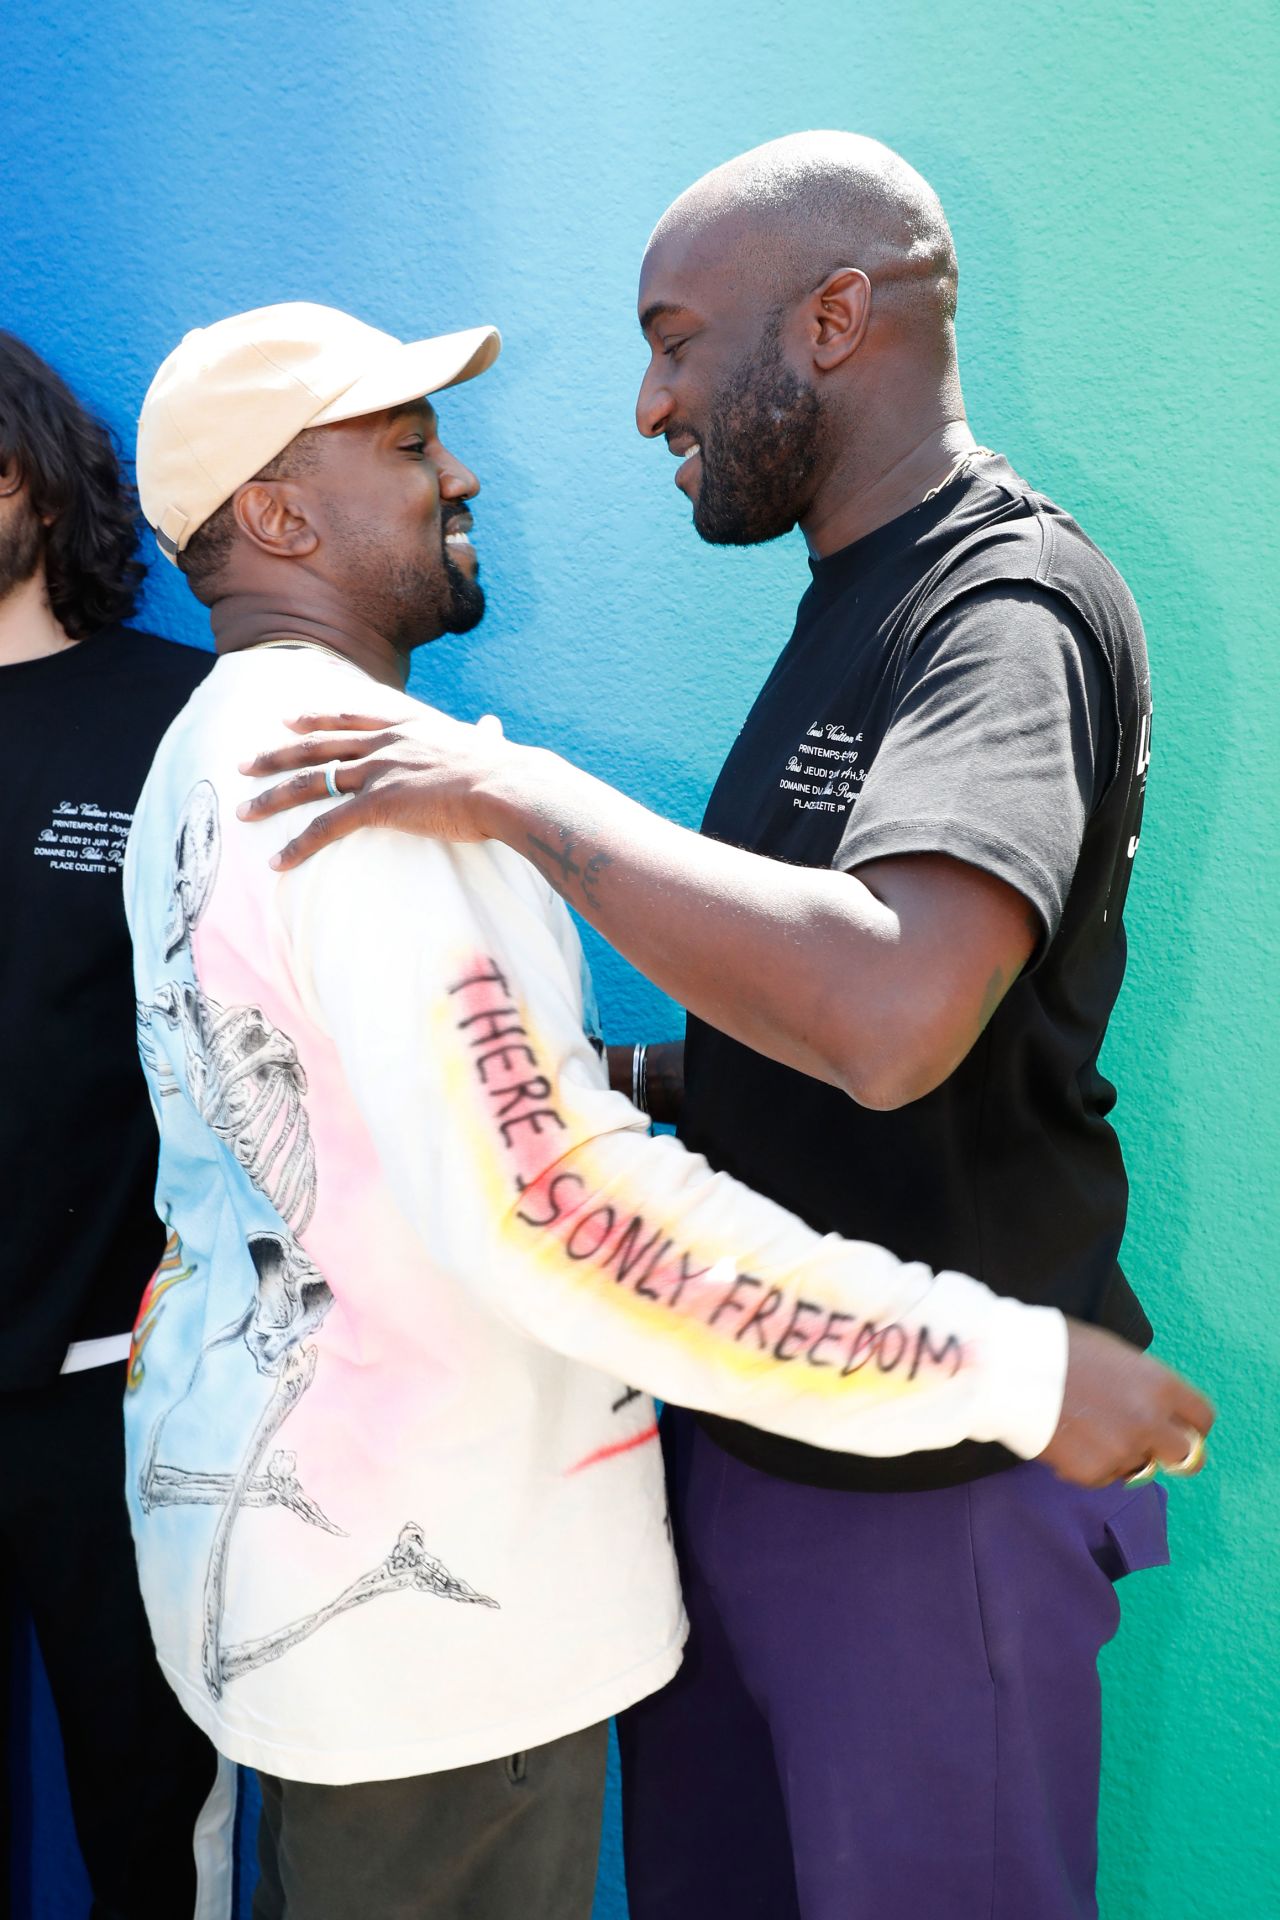 Abloh, who was also a prolific DJ, was deeply tied to the world of music and worked with many major players on their album covers. Kanye West was one of his most frequent collaborators with his album covers for "My Beautiful Dark Twisted Fantasy," and "Yeezus" designed by Abloh. Kid Cudi and Jay-Z were also known to have worked closely with Abloh.